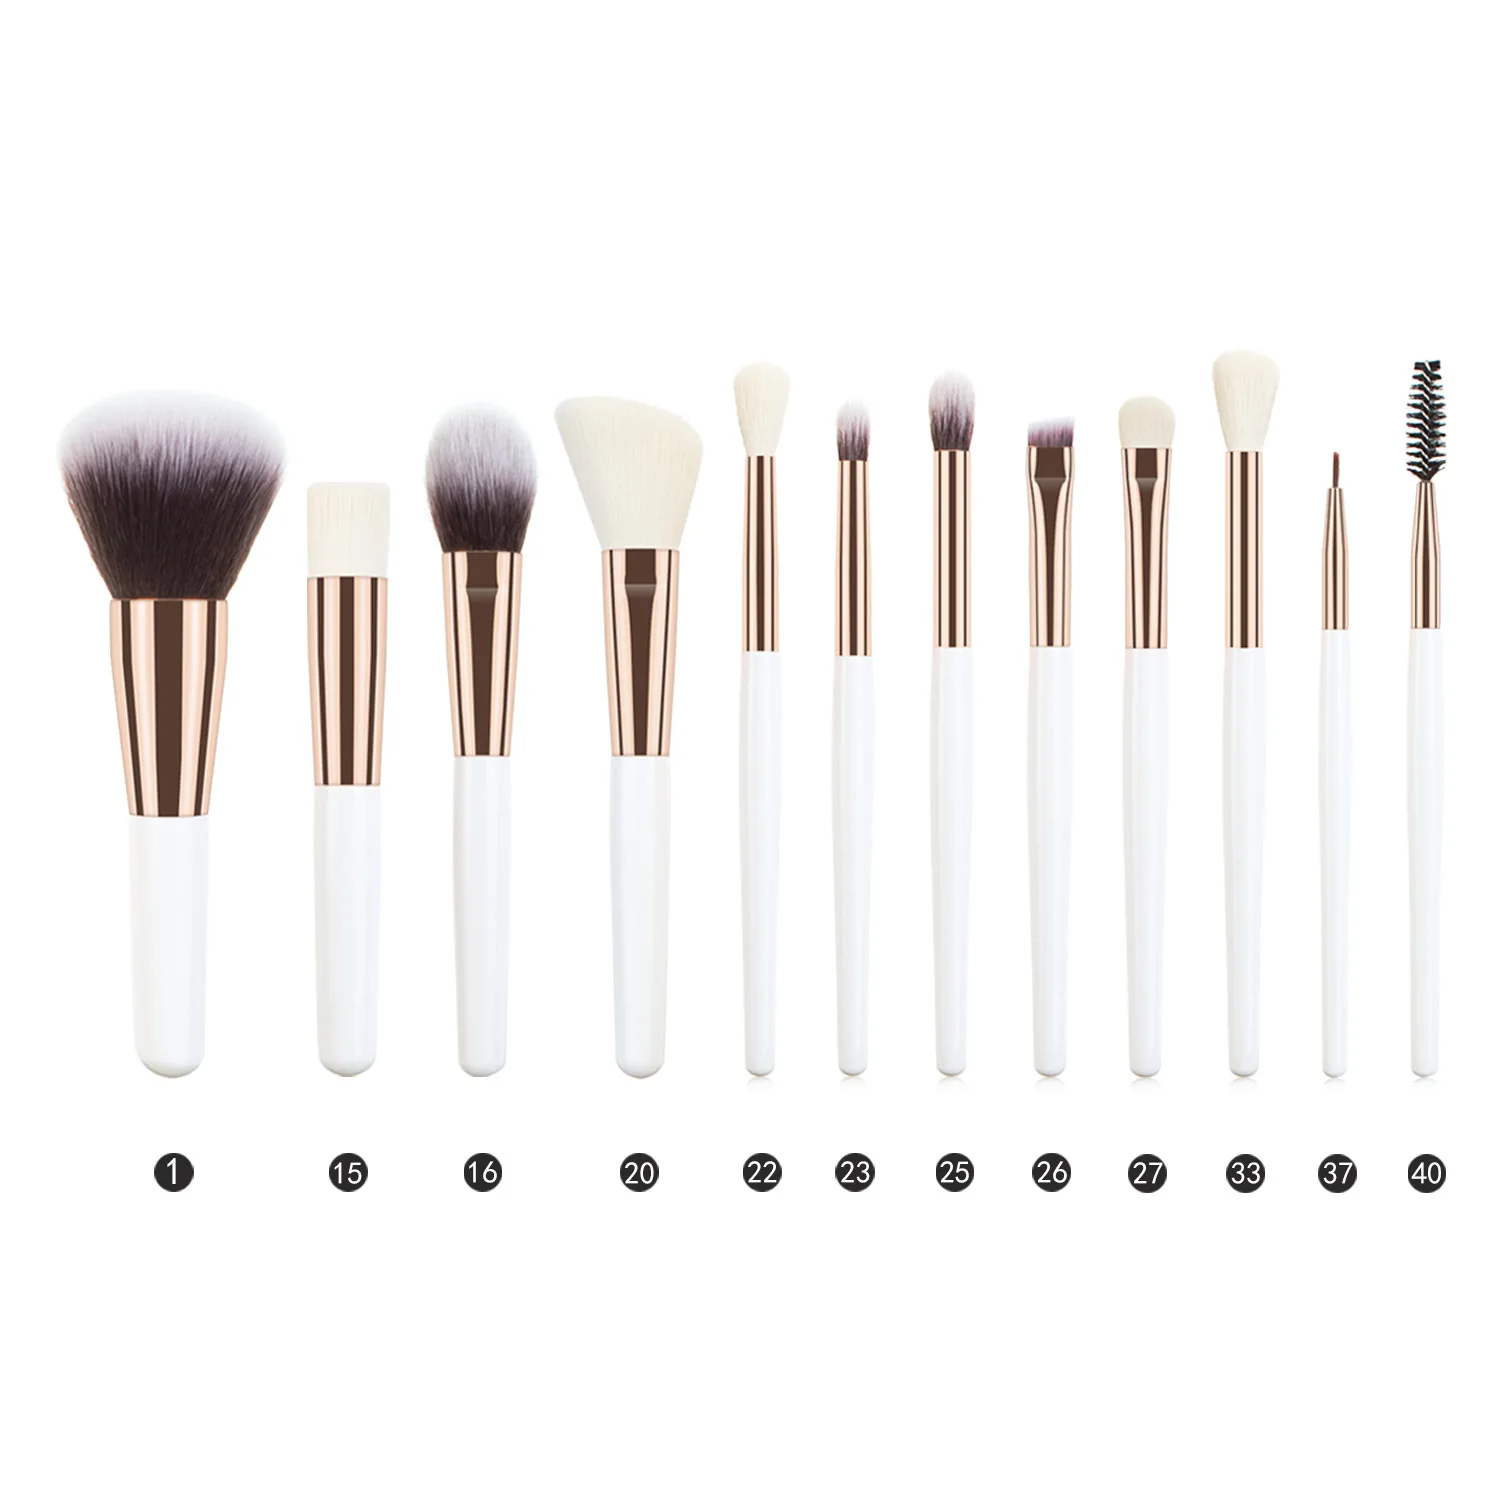 White Makeup Brushes Fast Shipping Cosmetiquera Makeup Brushes Private  Makeup Sets - AliExpress